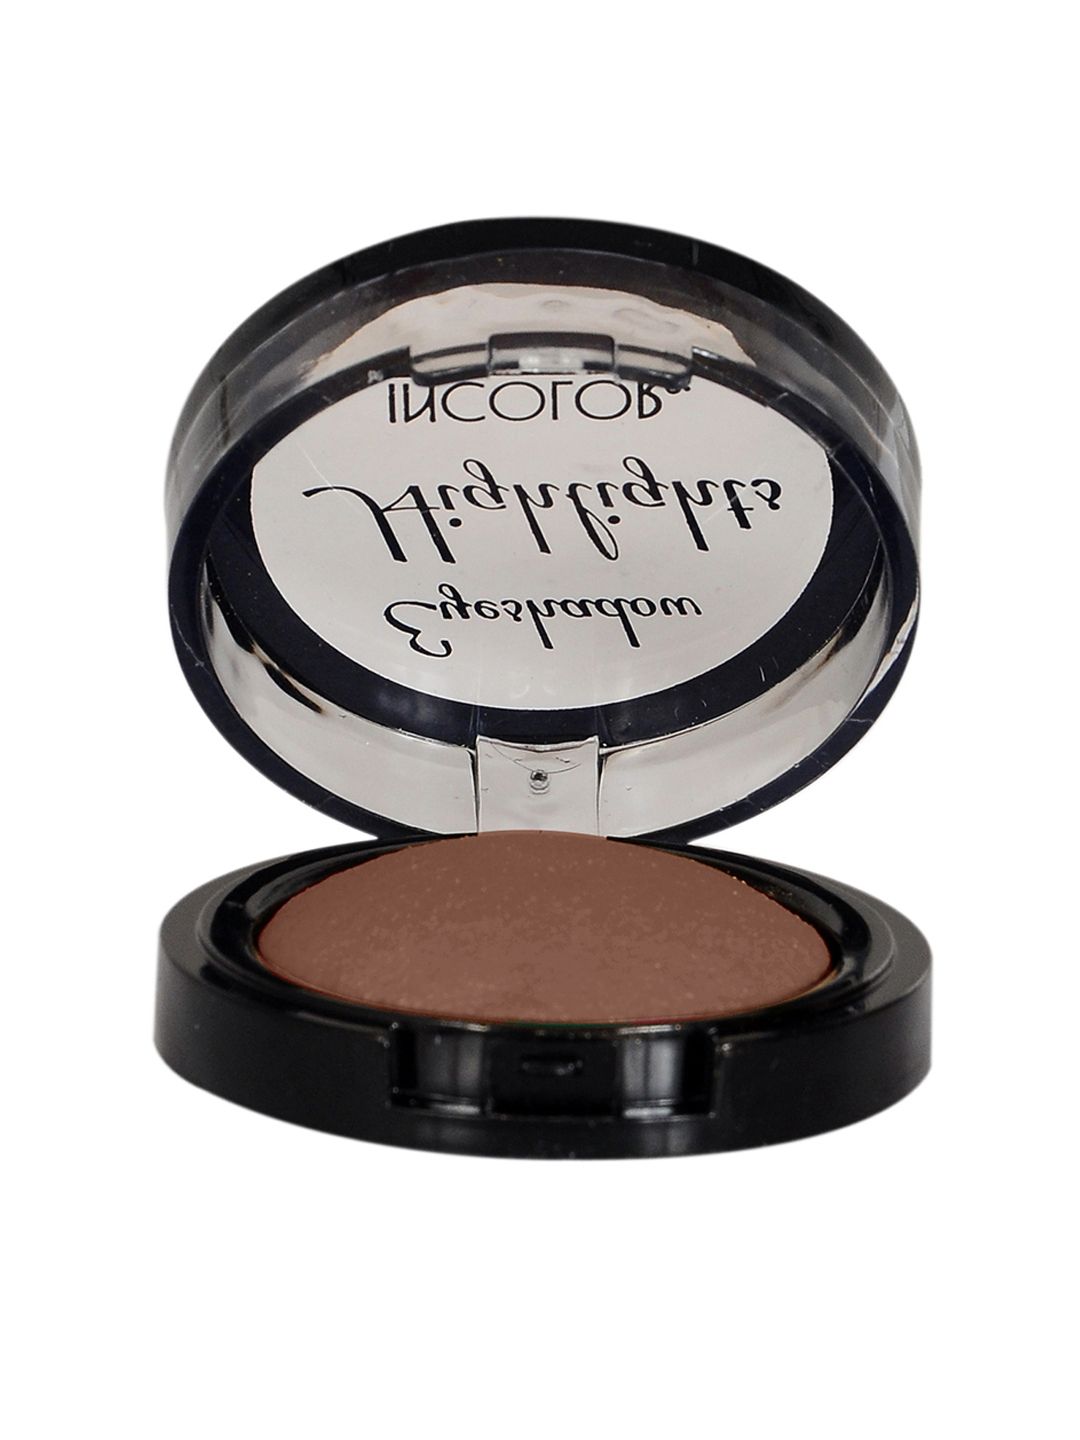 INCOLOR Brown Highlight Eyeshadow 24 4.5 gms Price in India